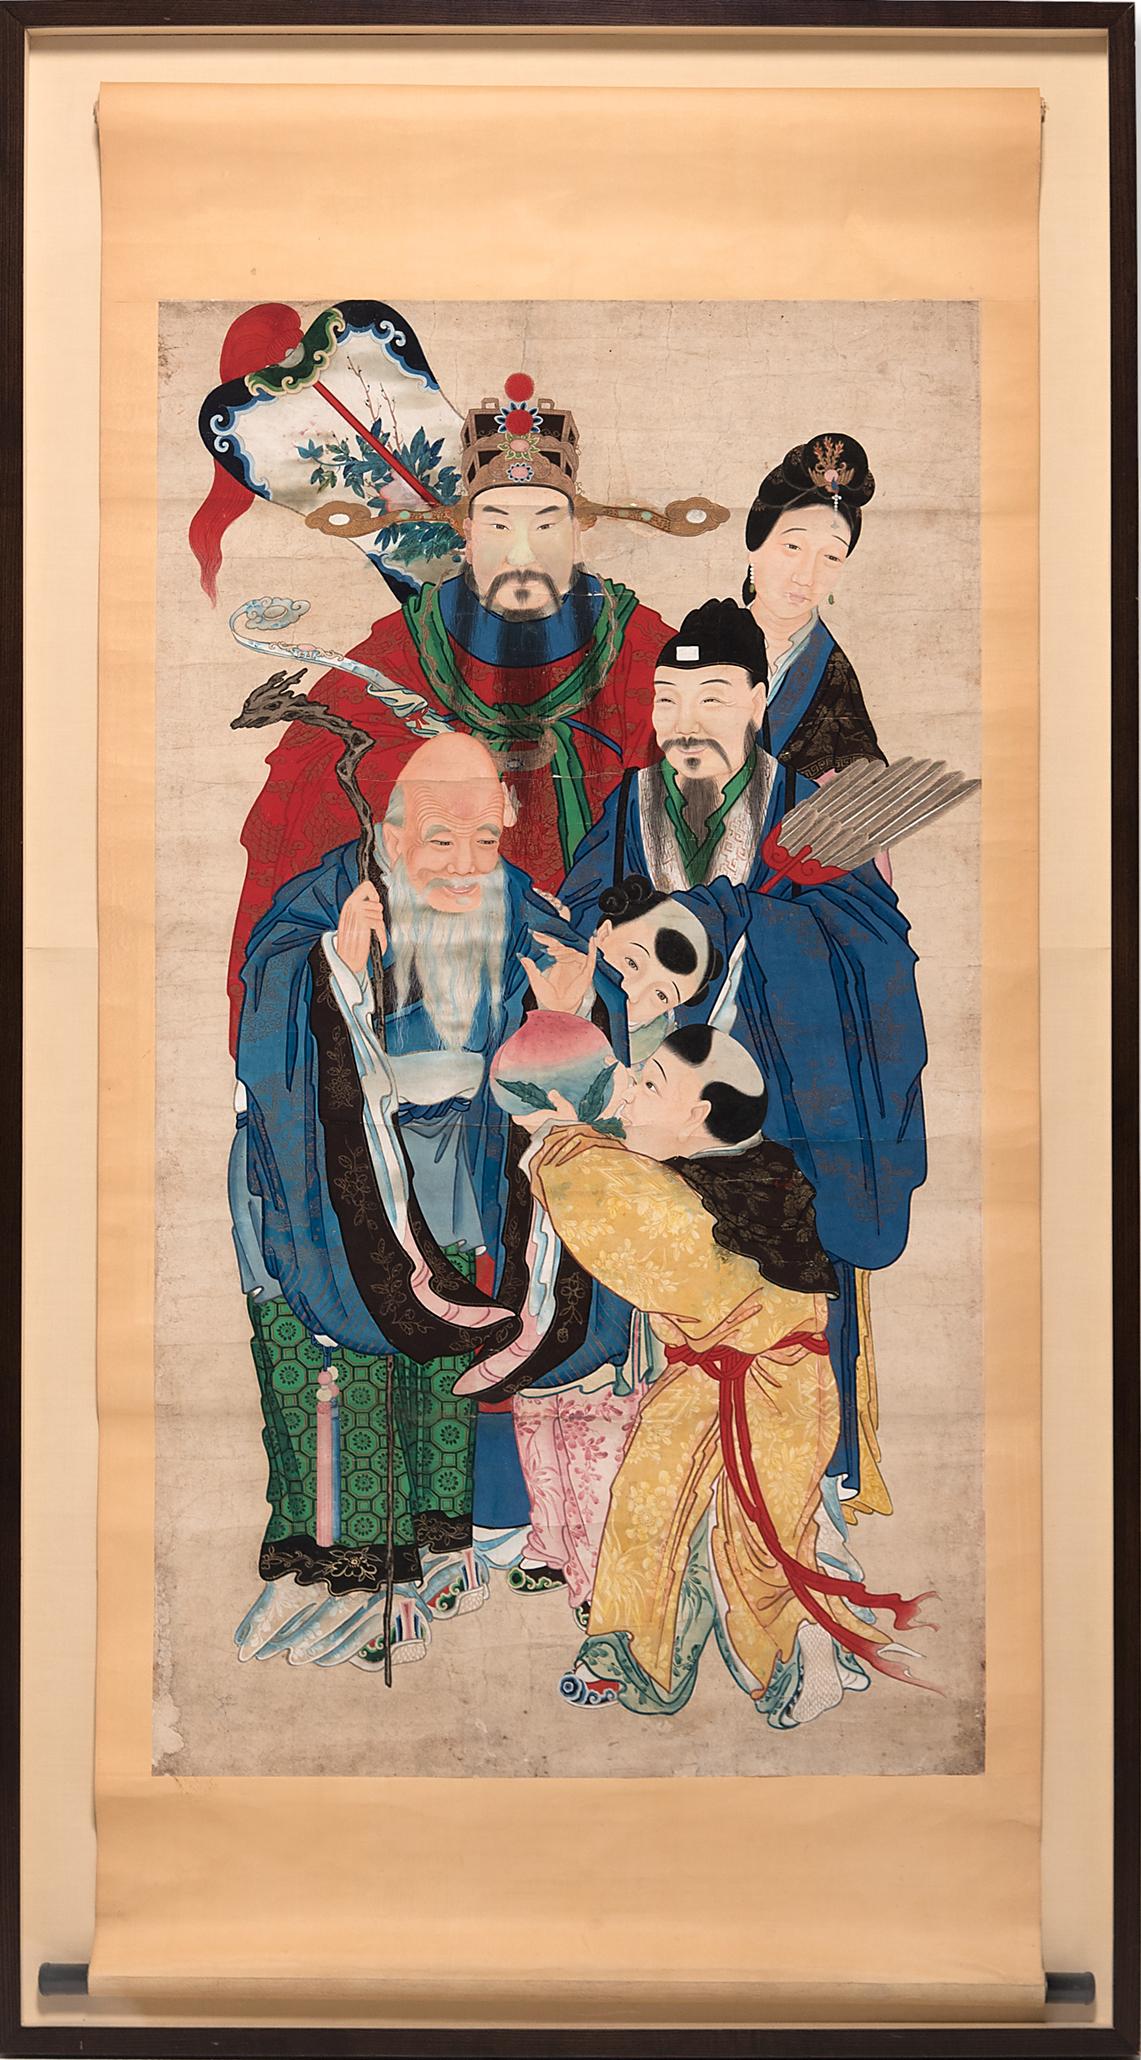 Chinese Lunar New Year Painted Scroll, c. 1850